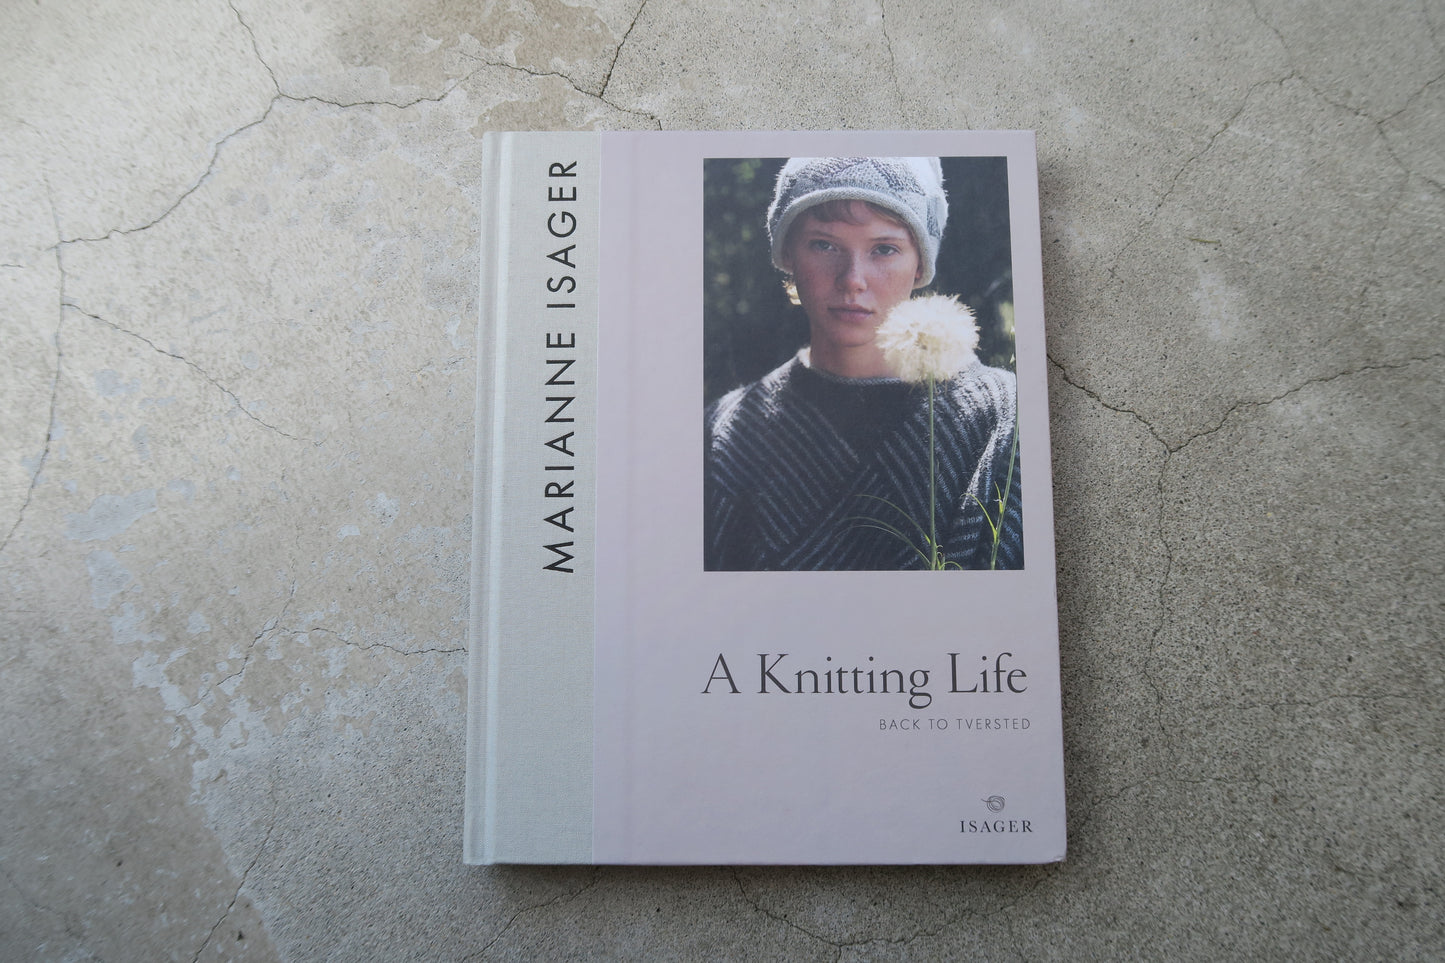 A Knitting Life--BACK TO TVERSTED